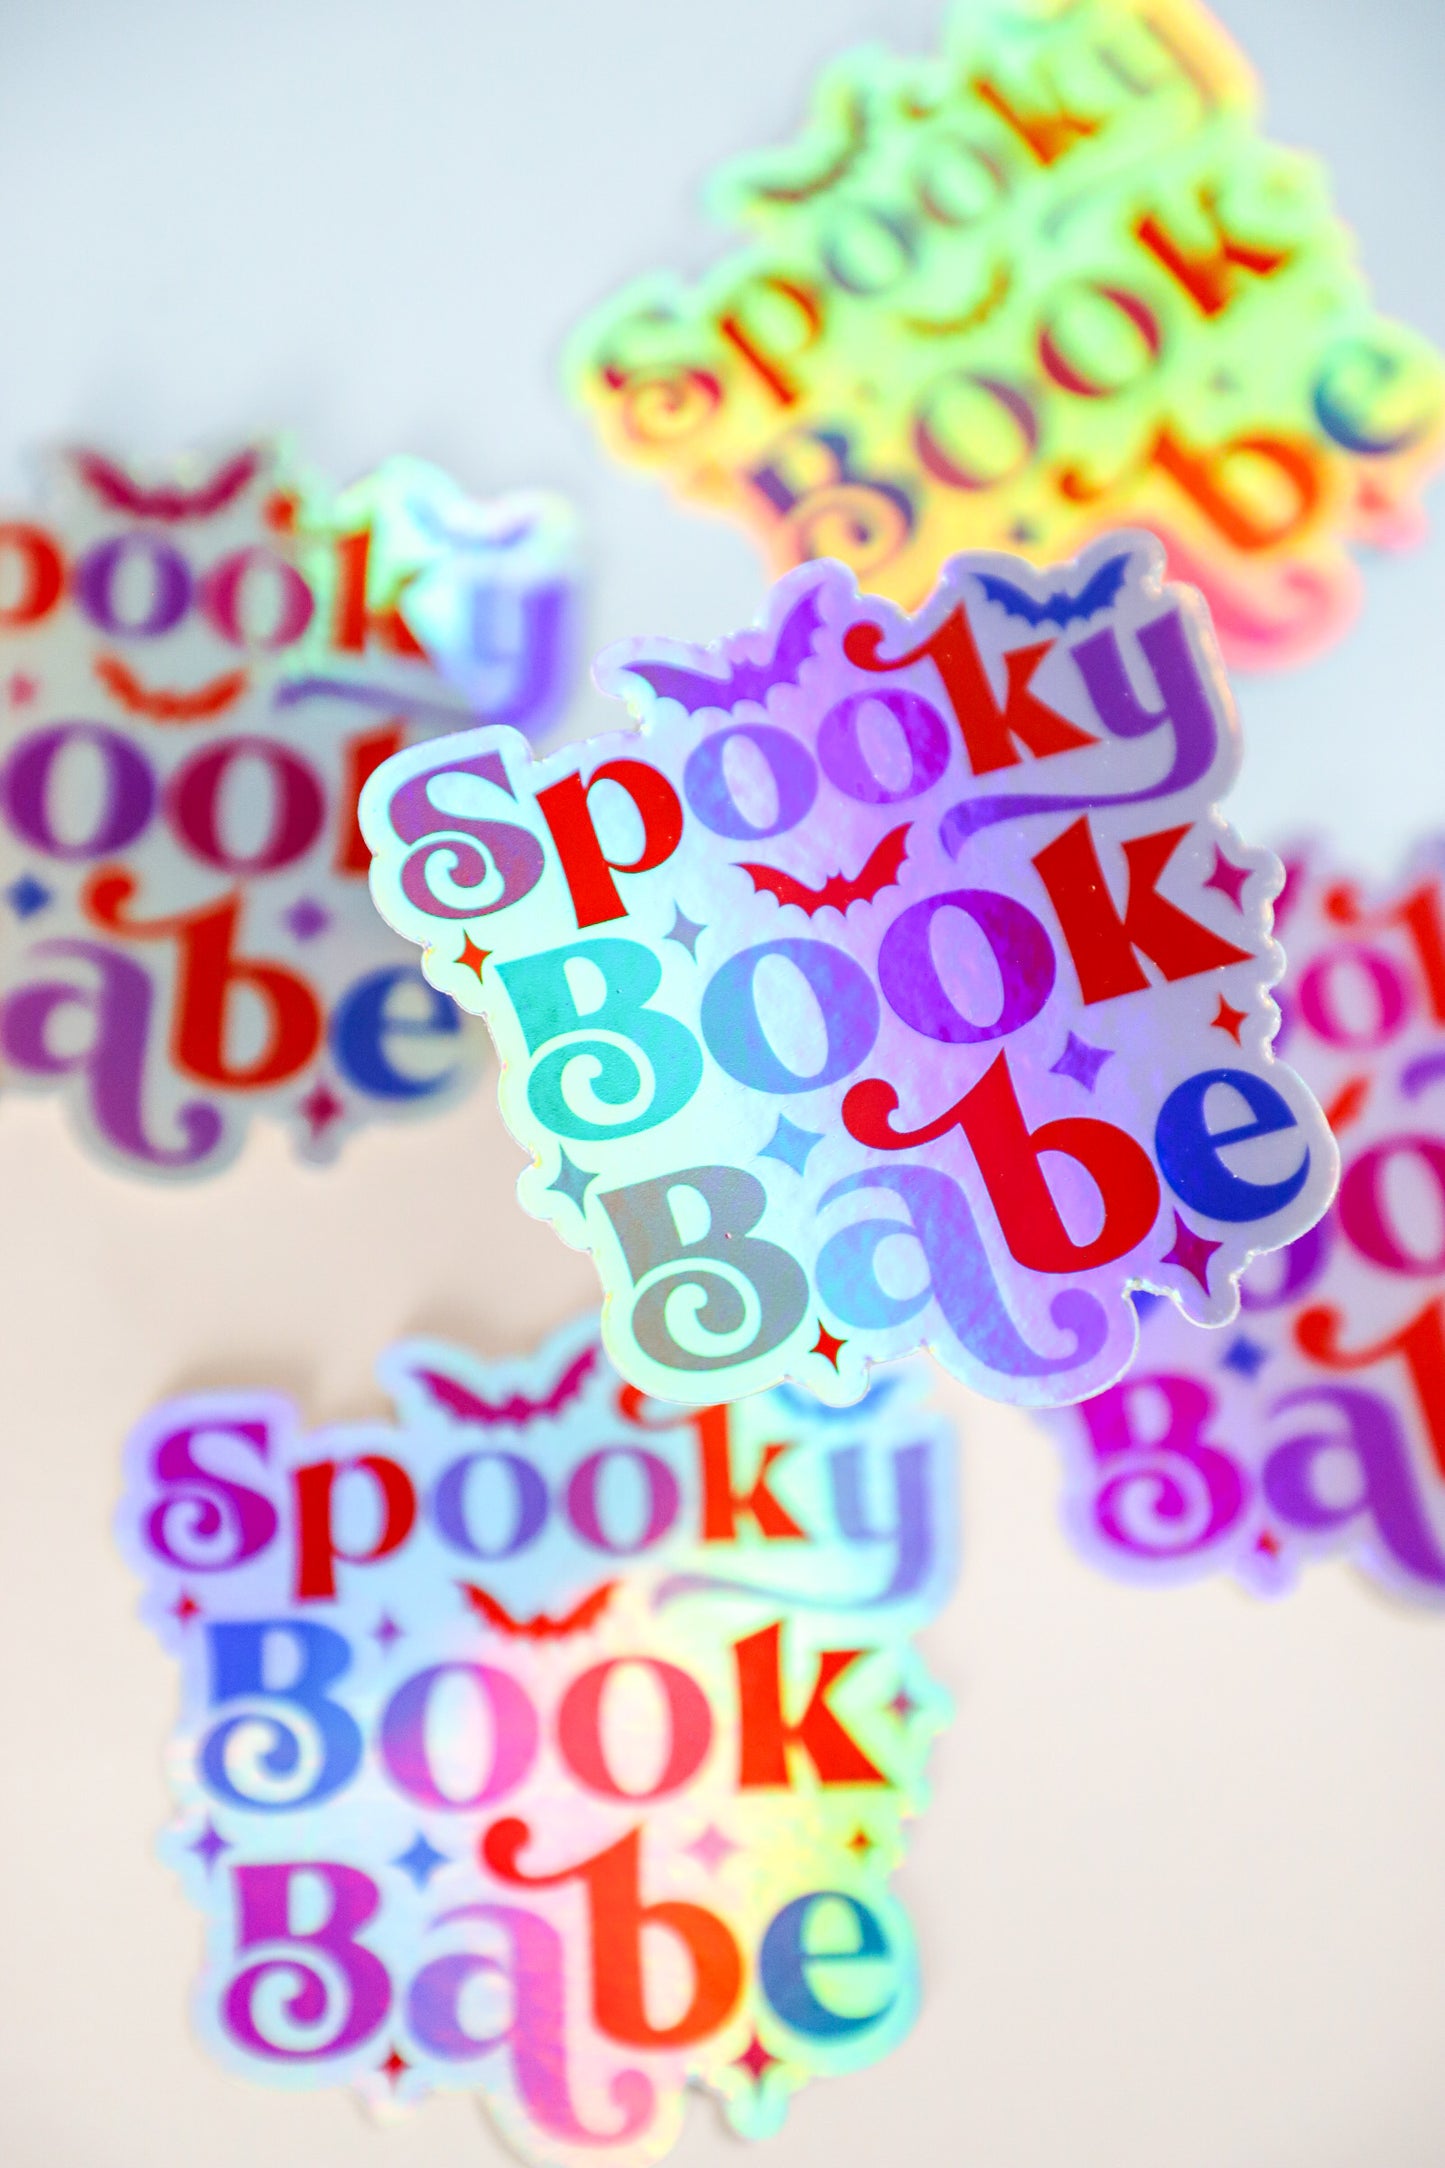 Spooky Book Babe Holographic Sticker